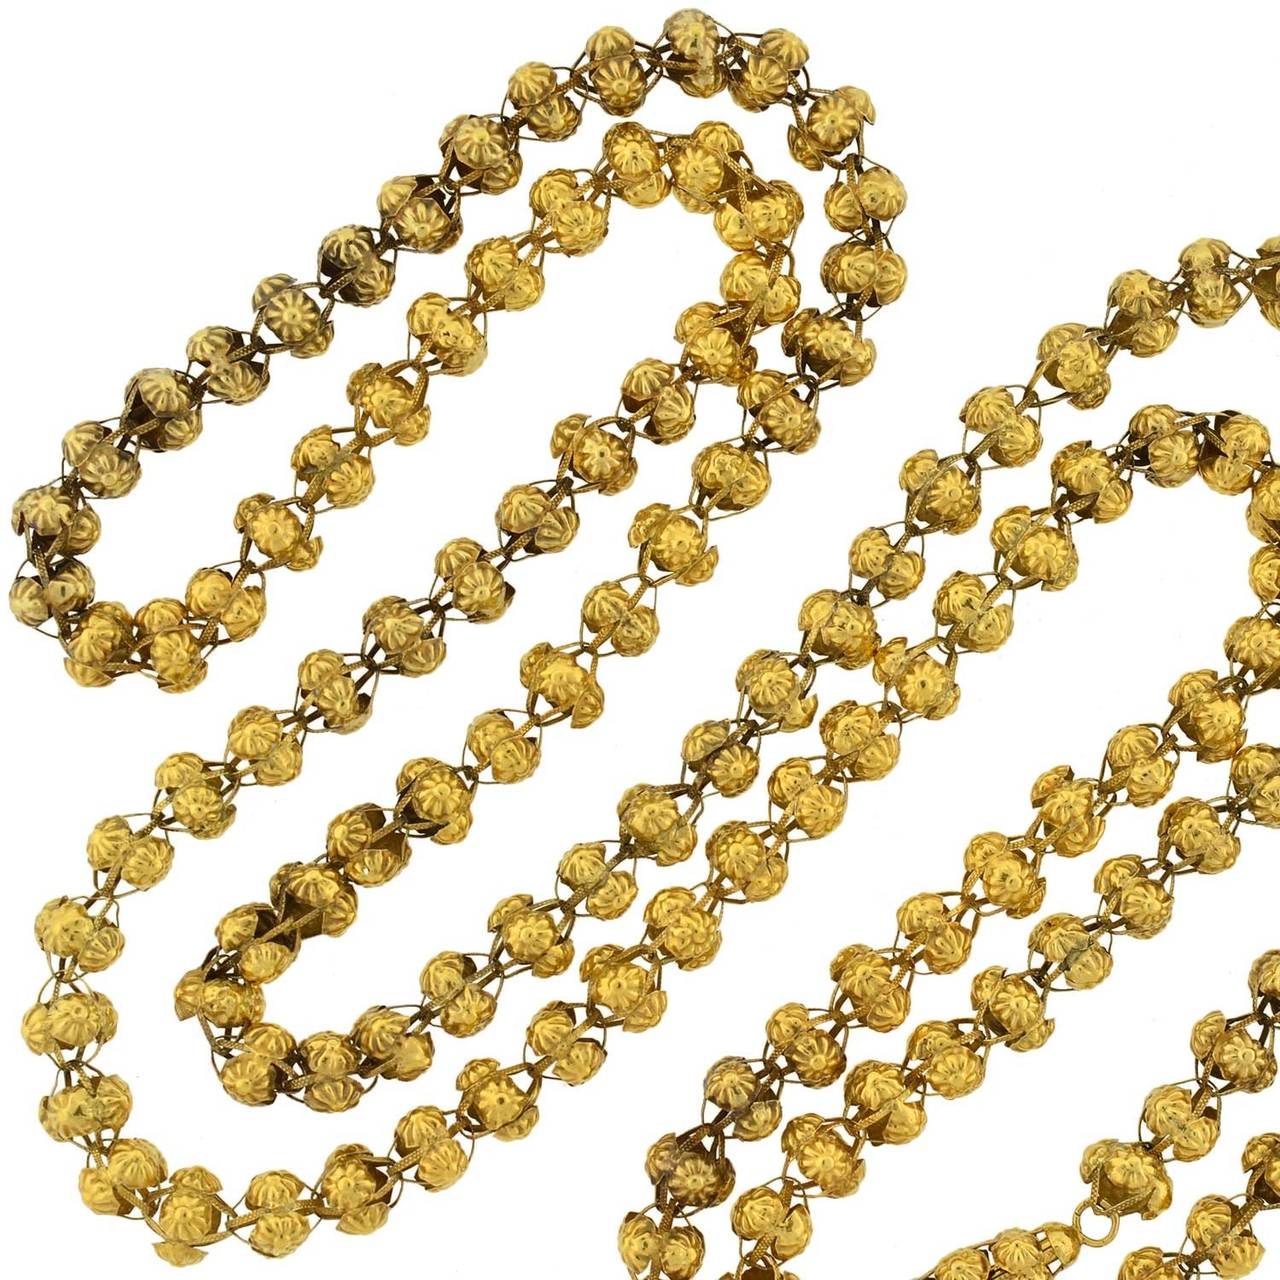 This beautiful and rare gold necklace is from the Georgian era (circa 1750) and makes a wonderful statement! The lovely design is comprised of handmade open bead links, which are crafted in vibrant 15kt yellow gold (indicating English origin). Each